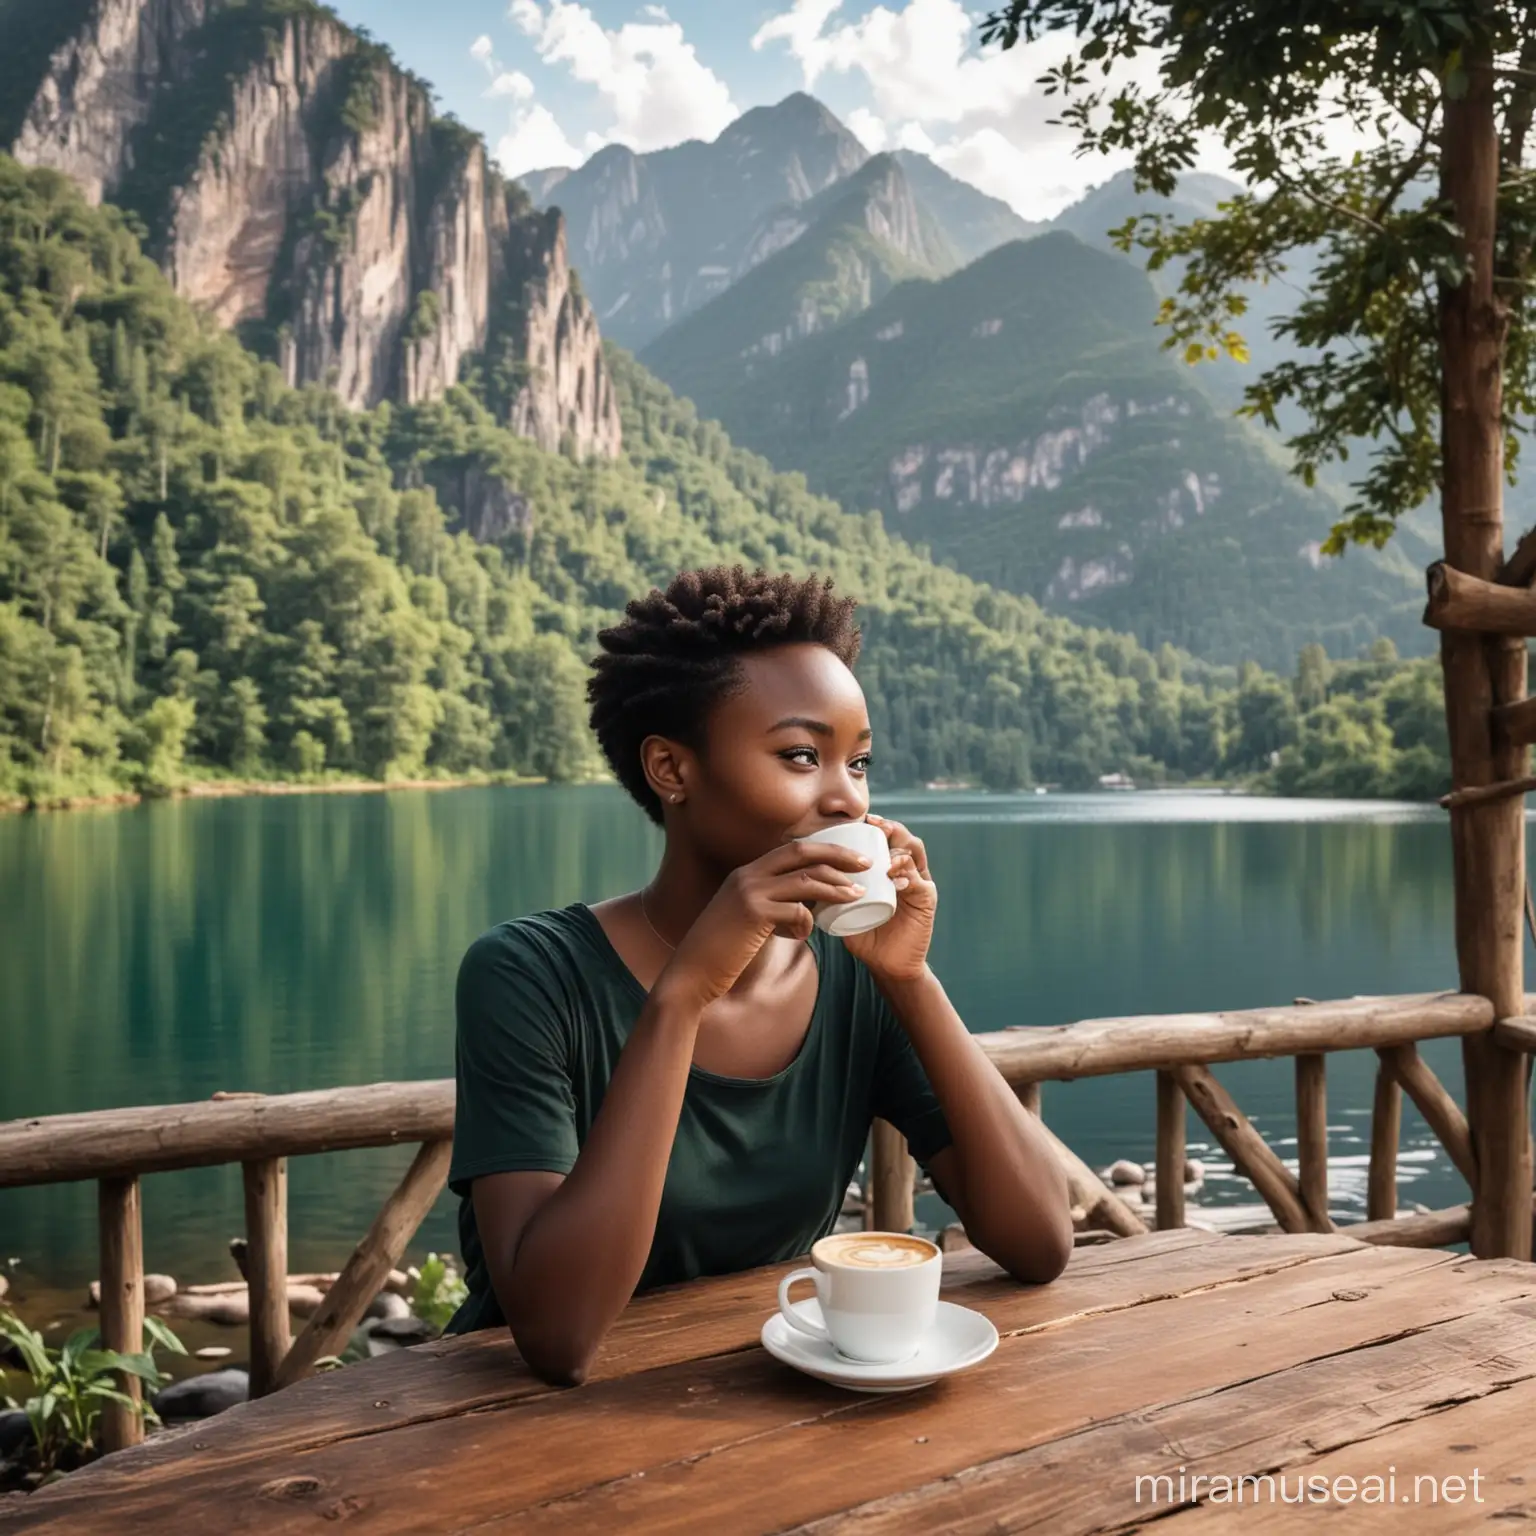  A beautiful young lady from Uganda, with fairly dark skin, round face, neatly short hair parted on the side, full-bodied, is drinking coffee in front of a wooden table, while enjoying the beautiful scenery of a lake surrounded by mountains and forests.